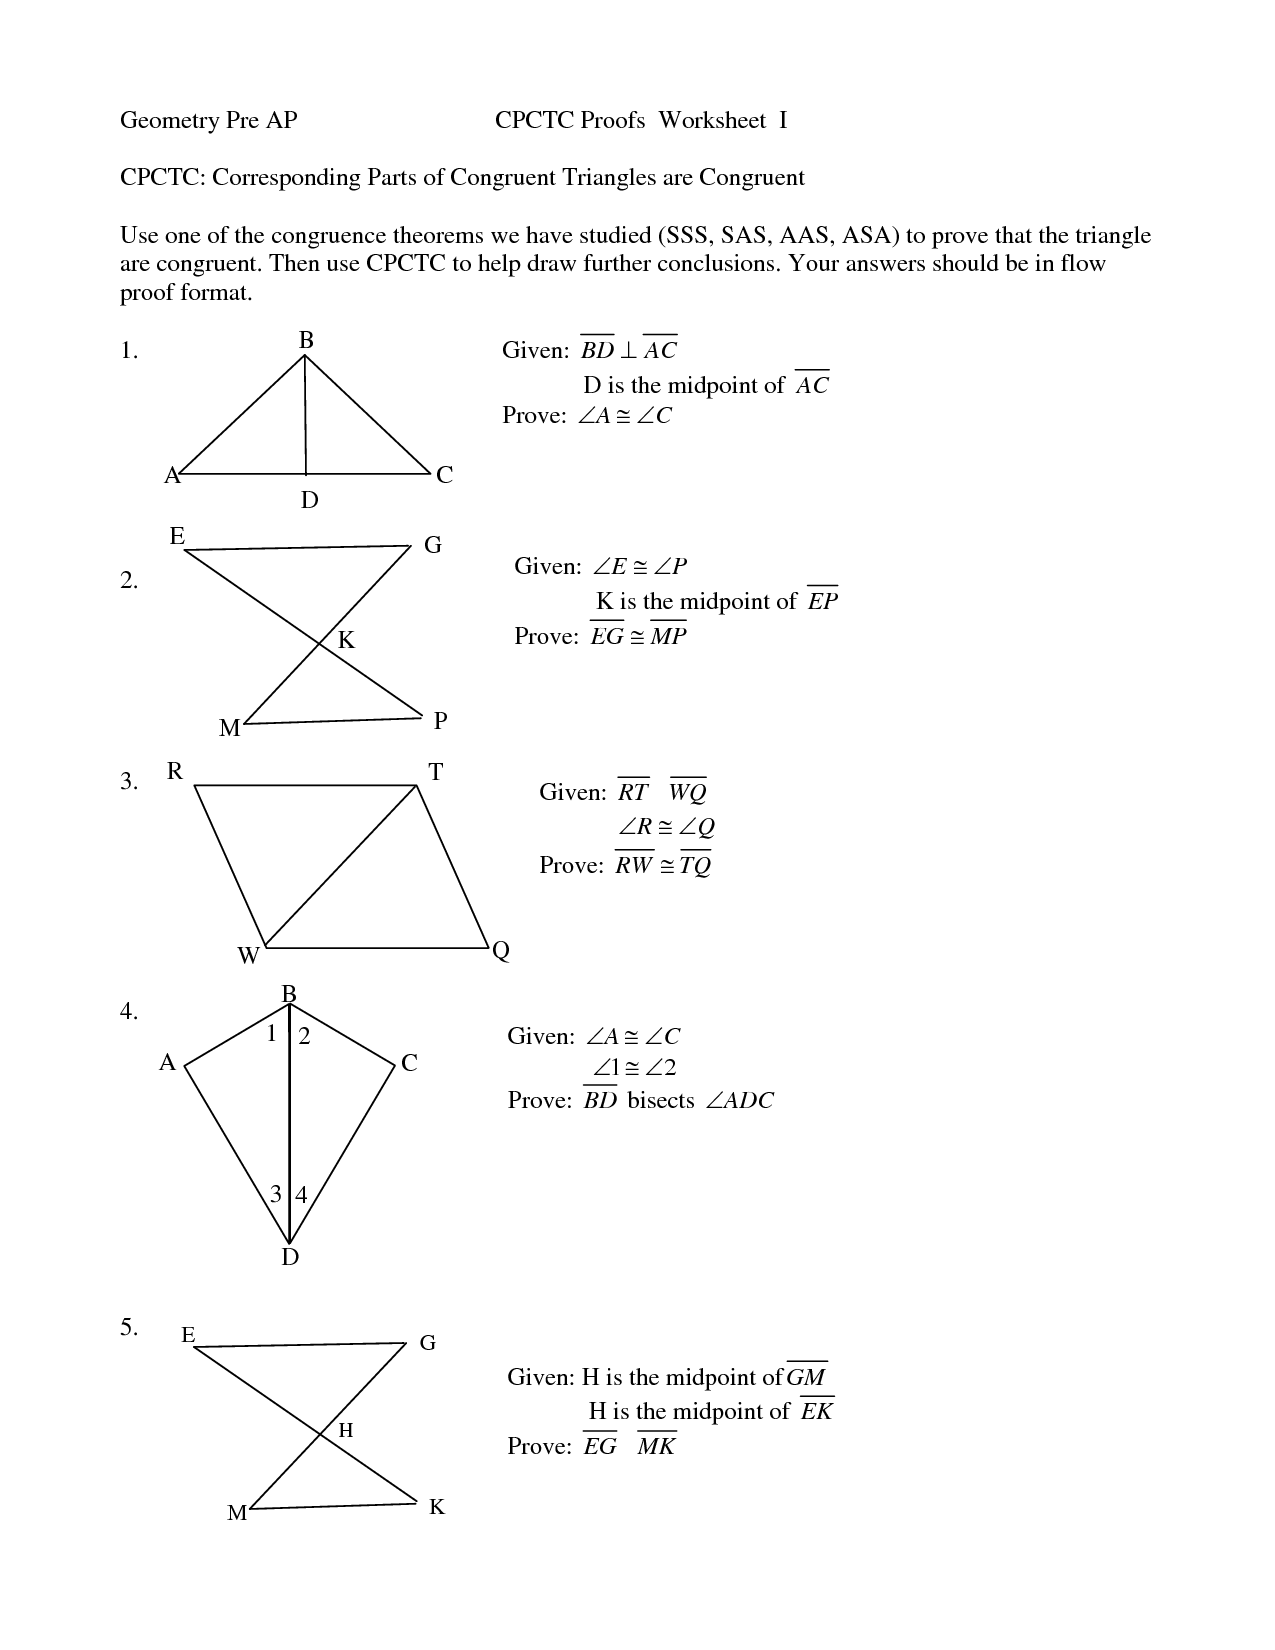 Proving Triangles Congruent Worksheet Answer Key - using congruent